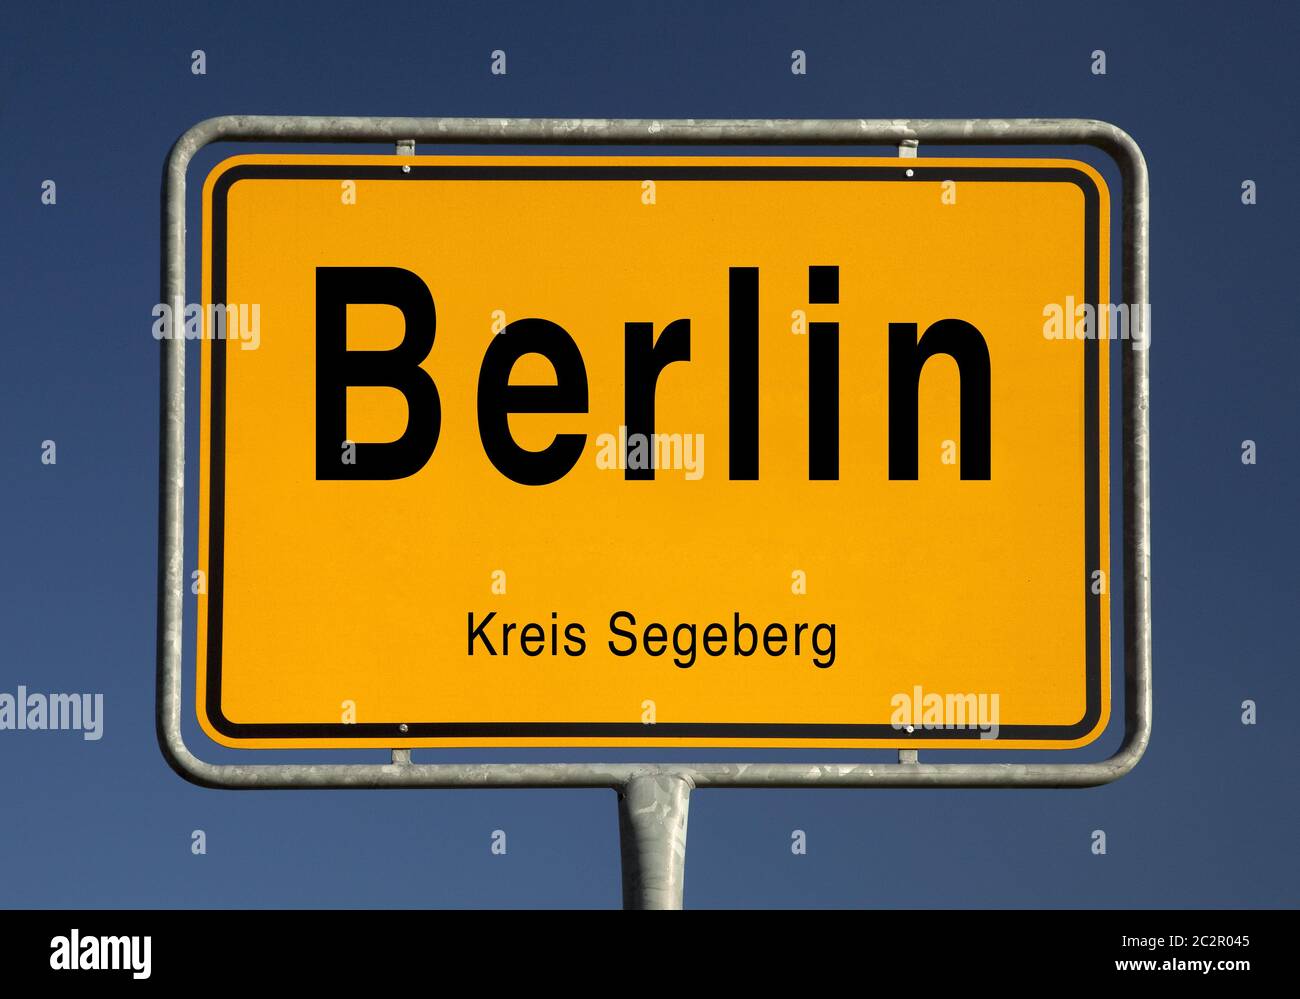 city entrance sign of Berlin, district of the municipality Seedorf, Kreis Segeberg, Germany, Europe Stock Photo